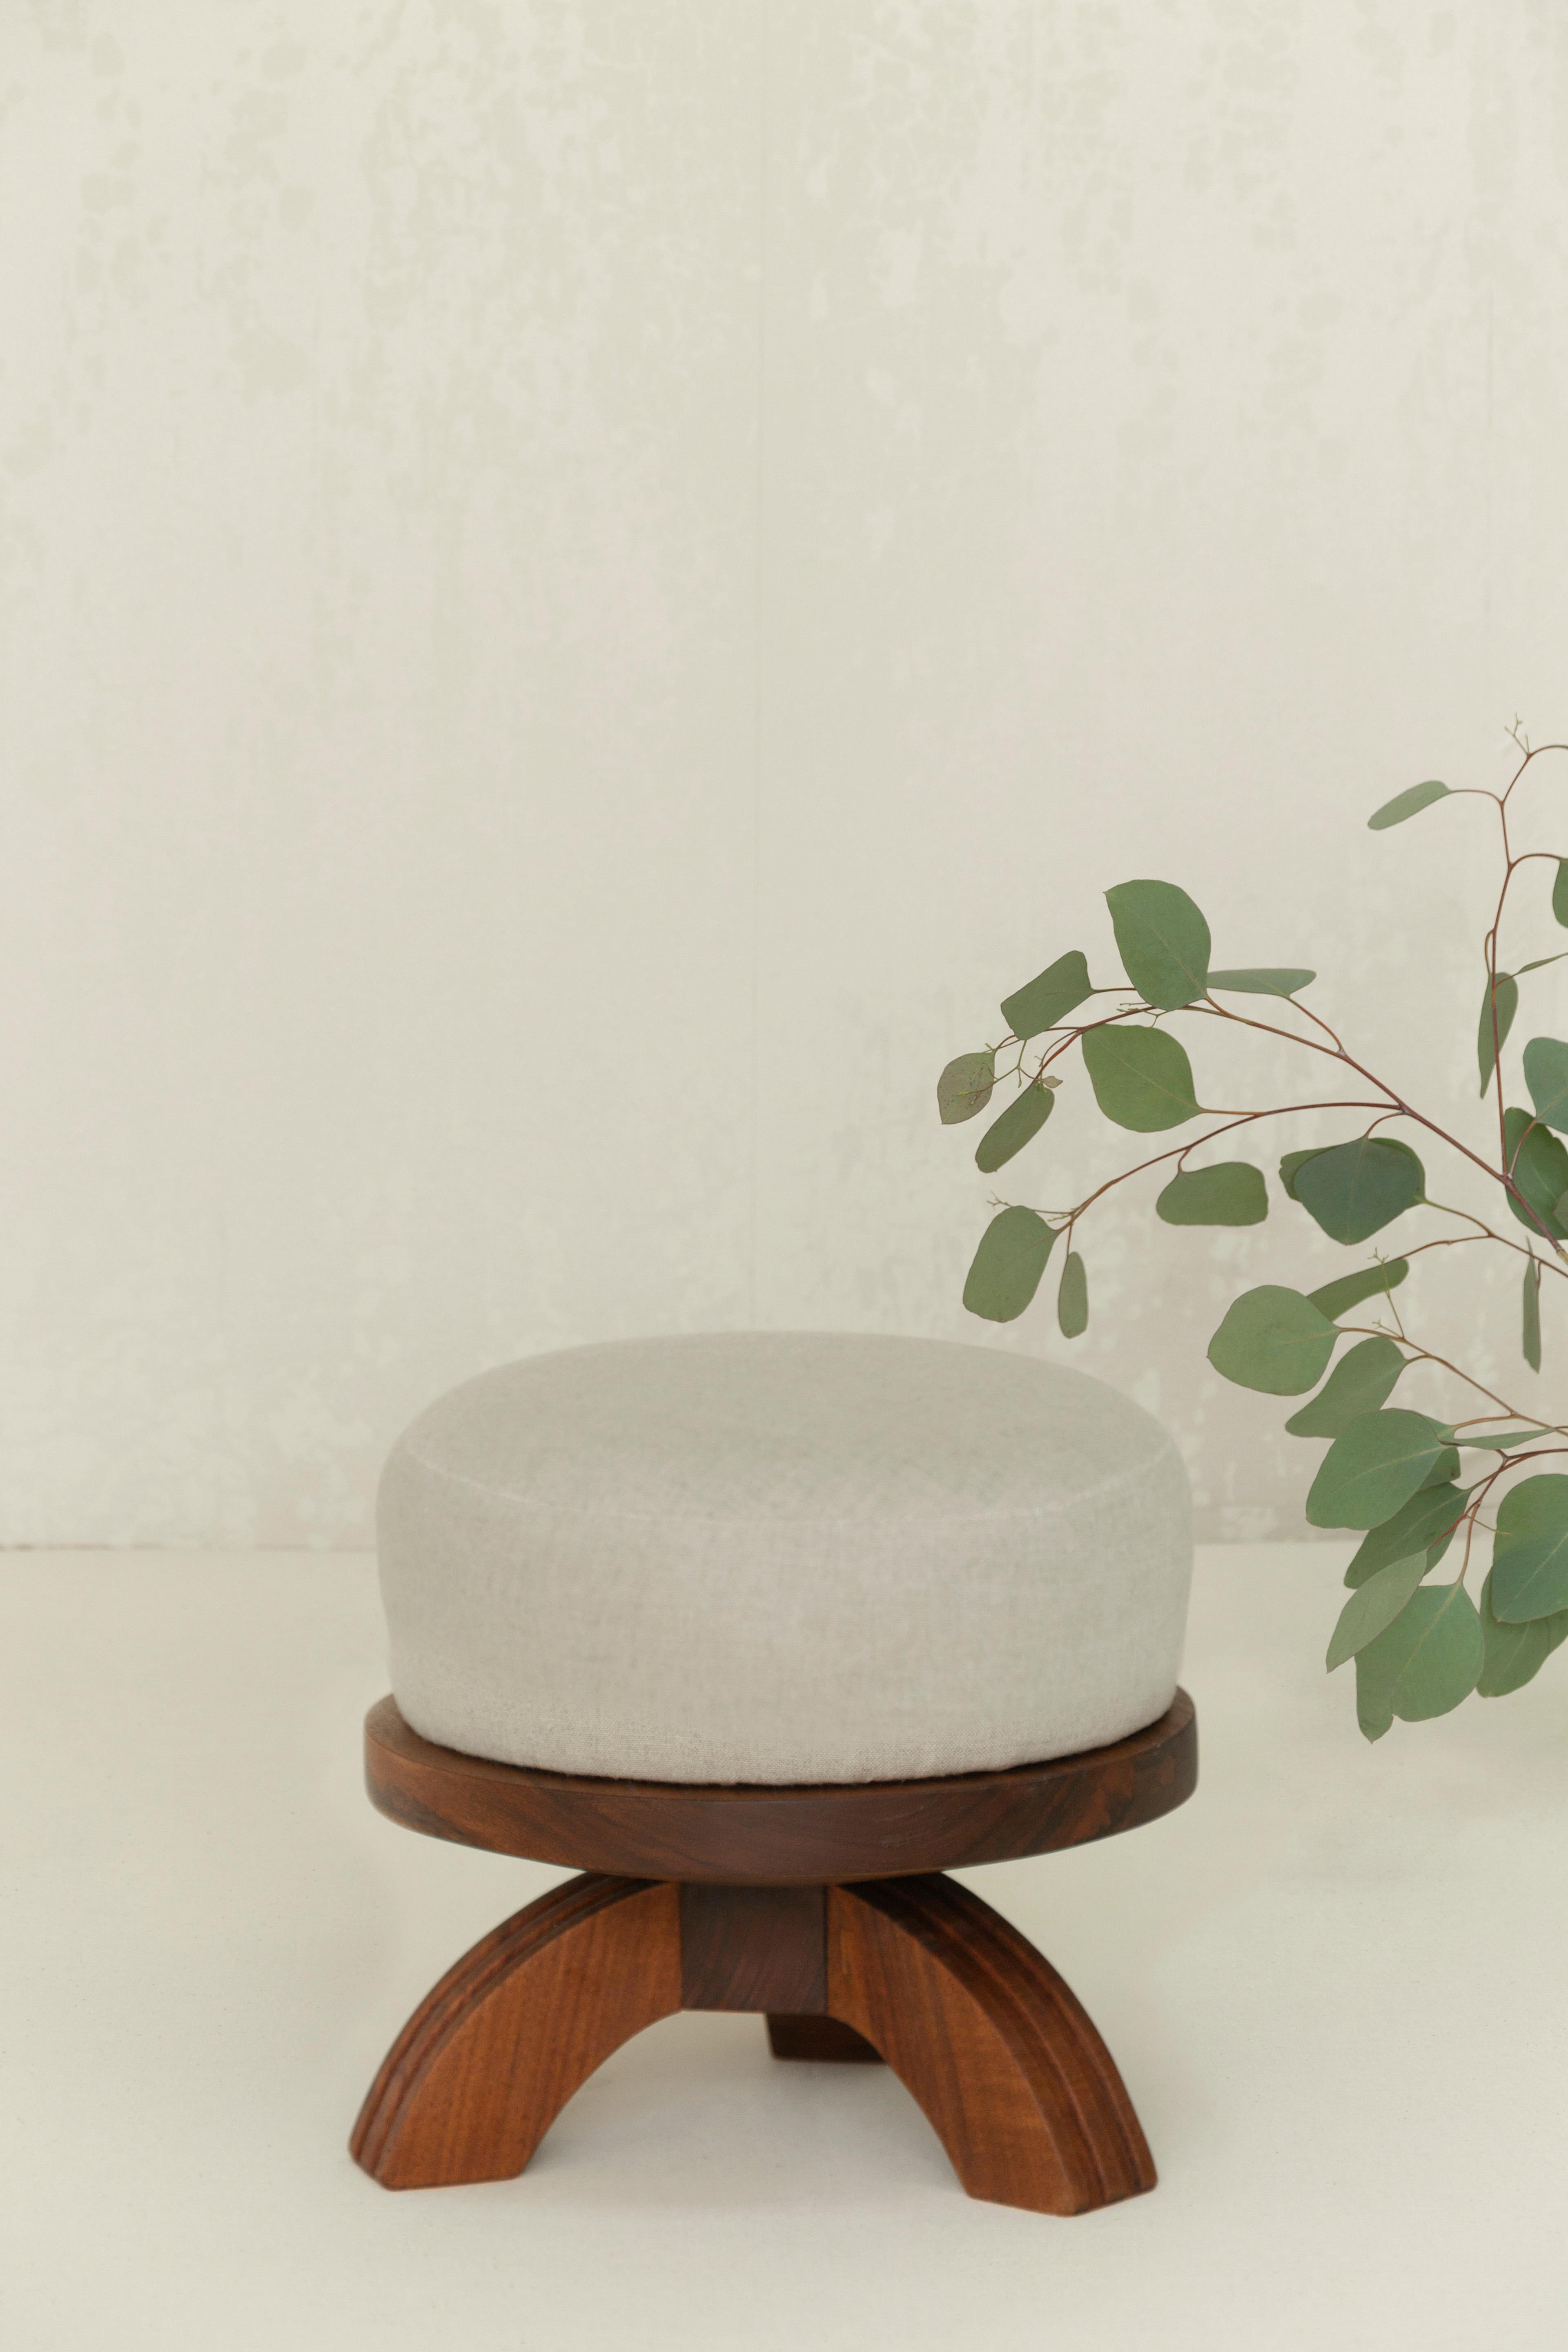 Discover serenity with the Tara Meditation Stool – a truly unique piece crafted from the exquisite tzalam wood, paired seamlessly with linen upholstery. Immerse yourself in the art of mindfulness and relaxation with this thoughtfully designed stool